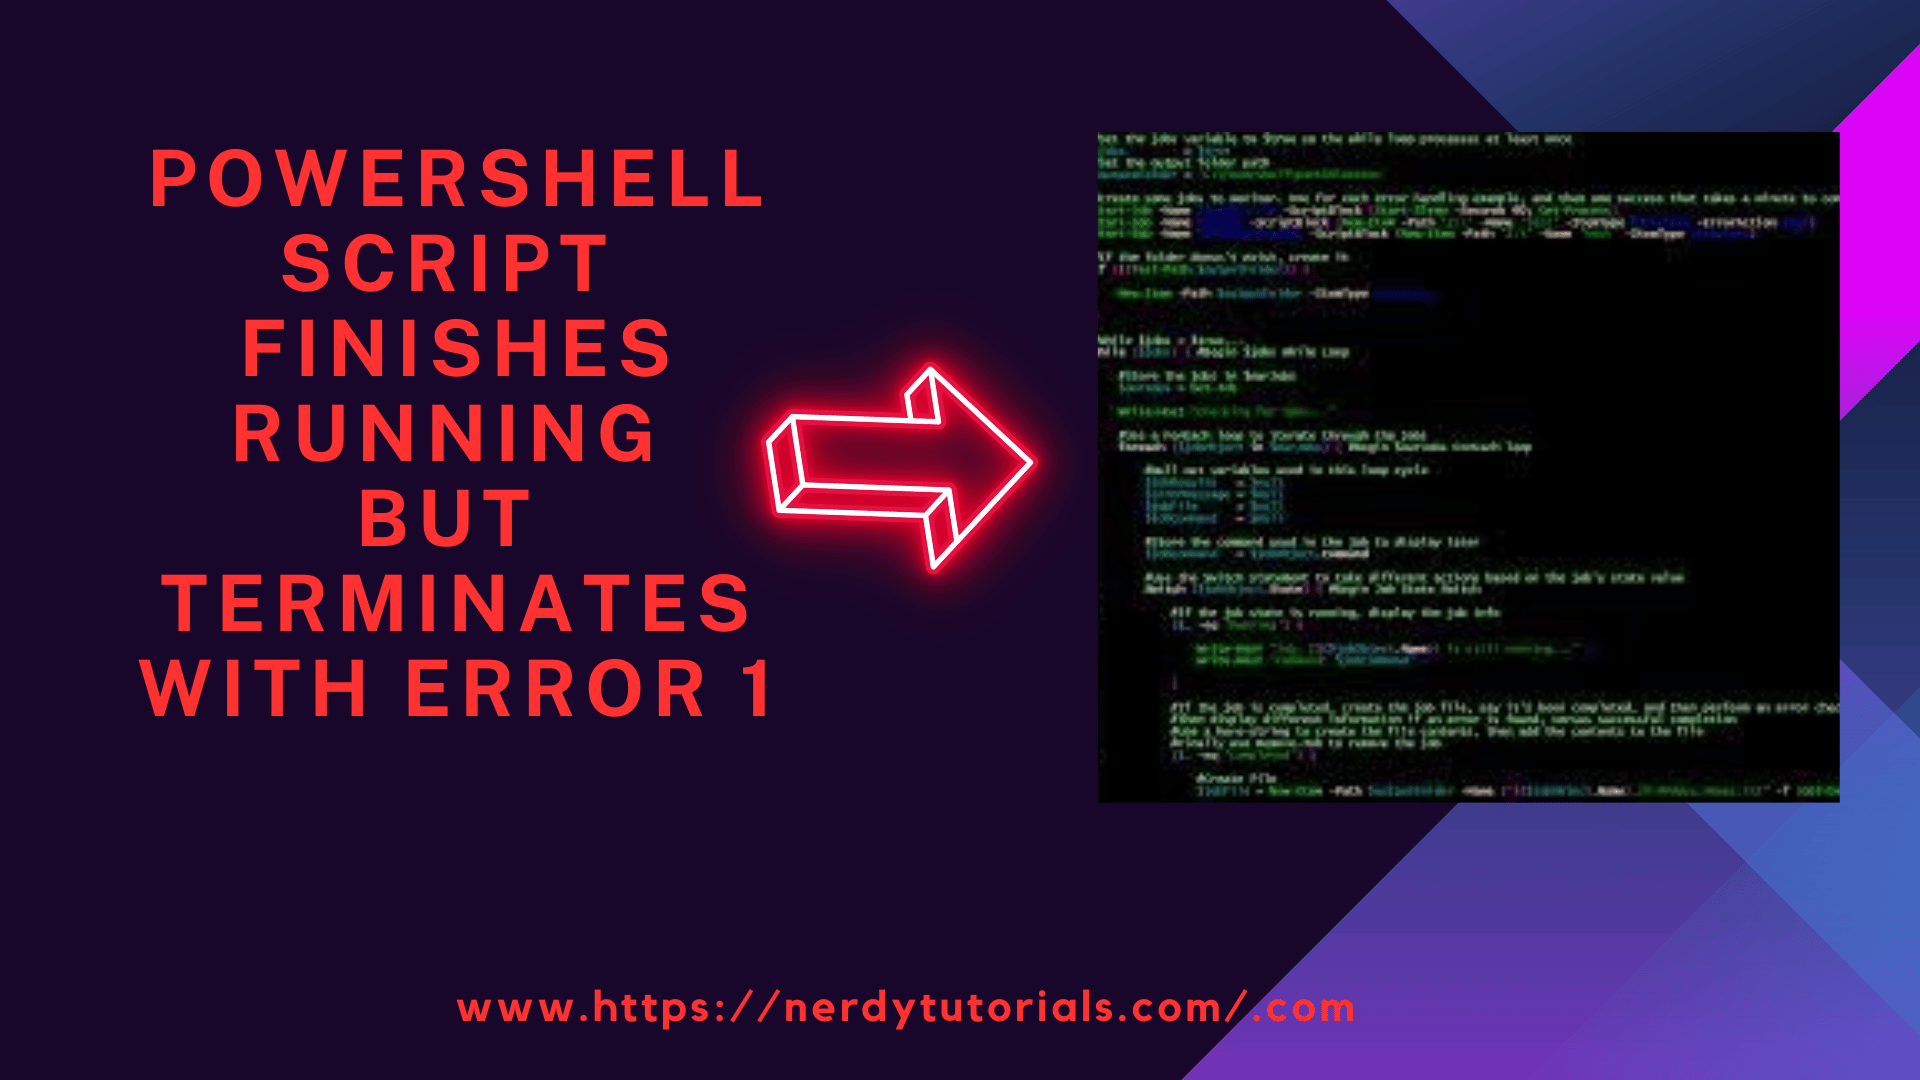 Powershell script finishes running but terminates with error 1